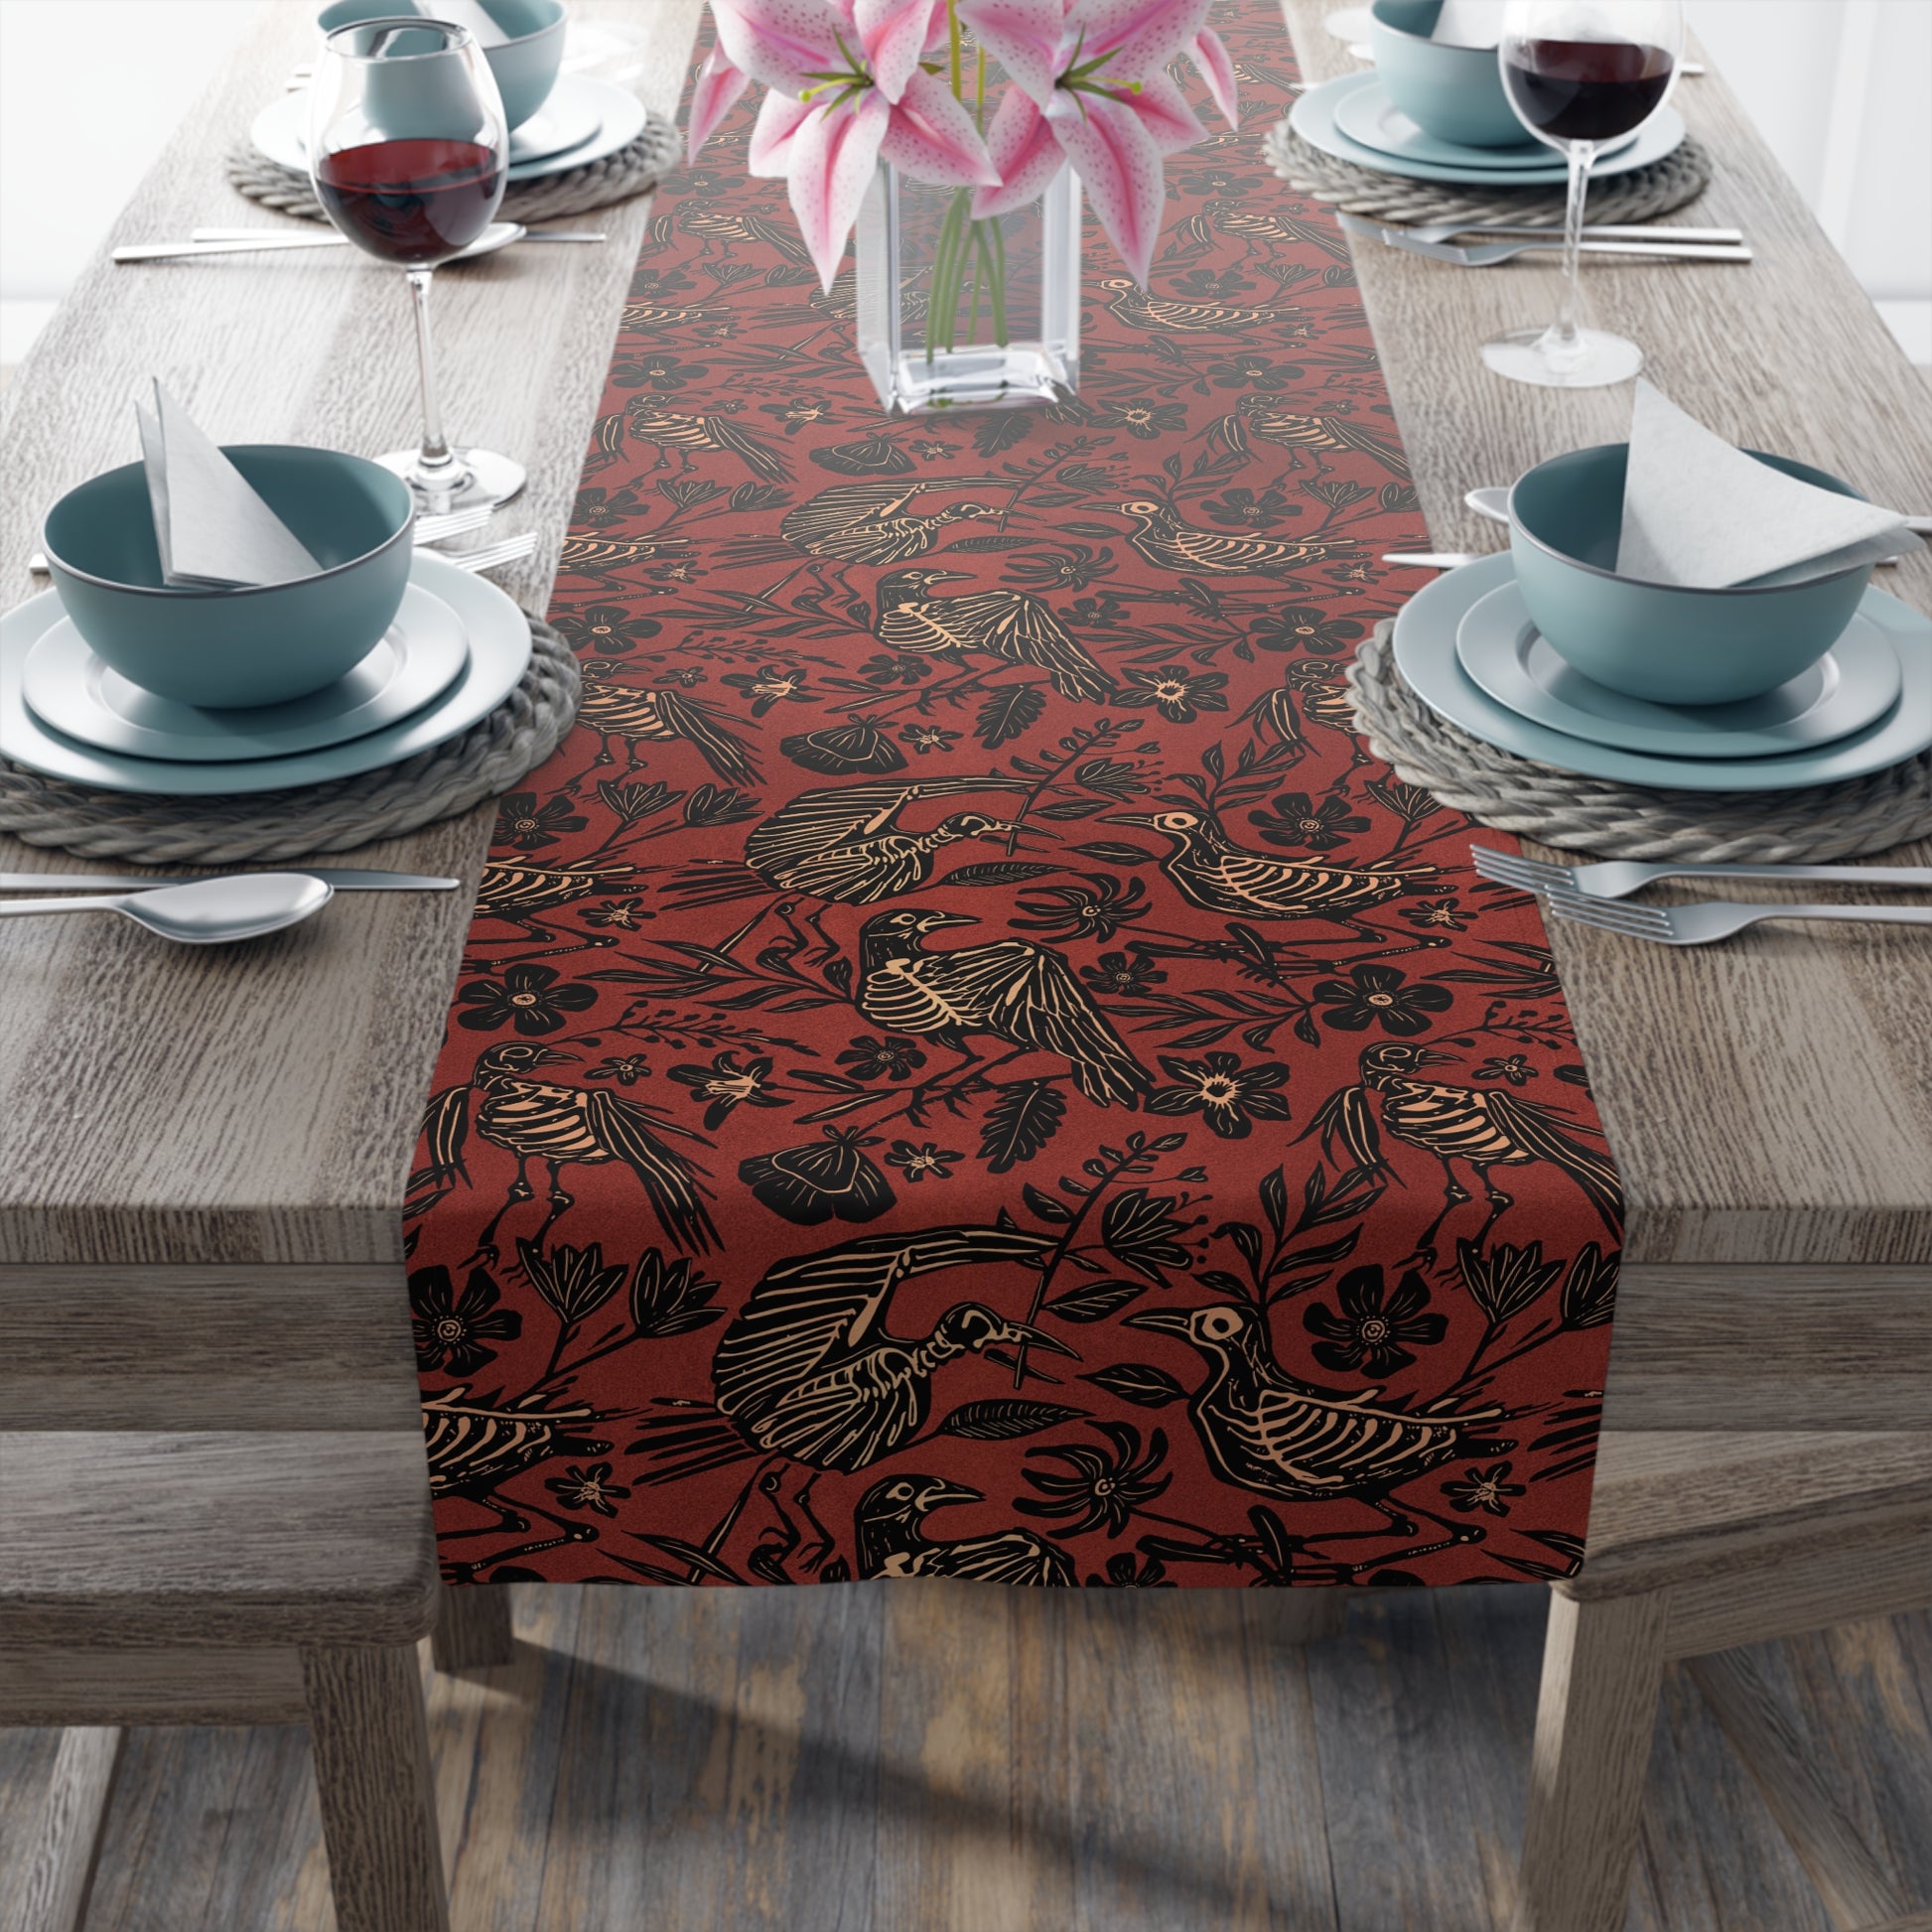 macabre autumn folk art floral bird skeleton table runner in rust red orange on an elegant table with ceramic dishes and a vase of lillies